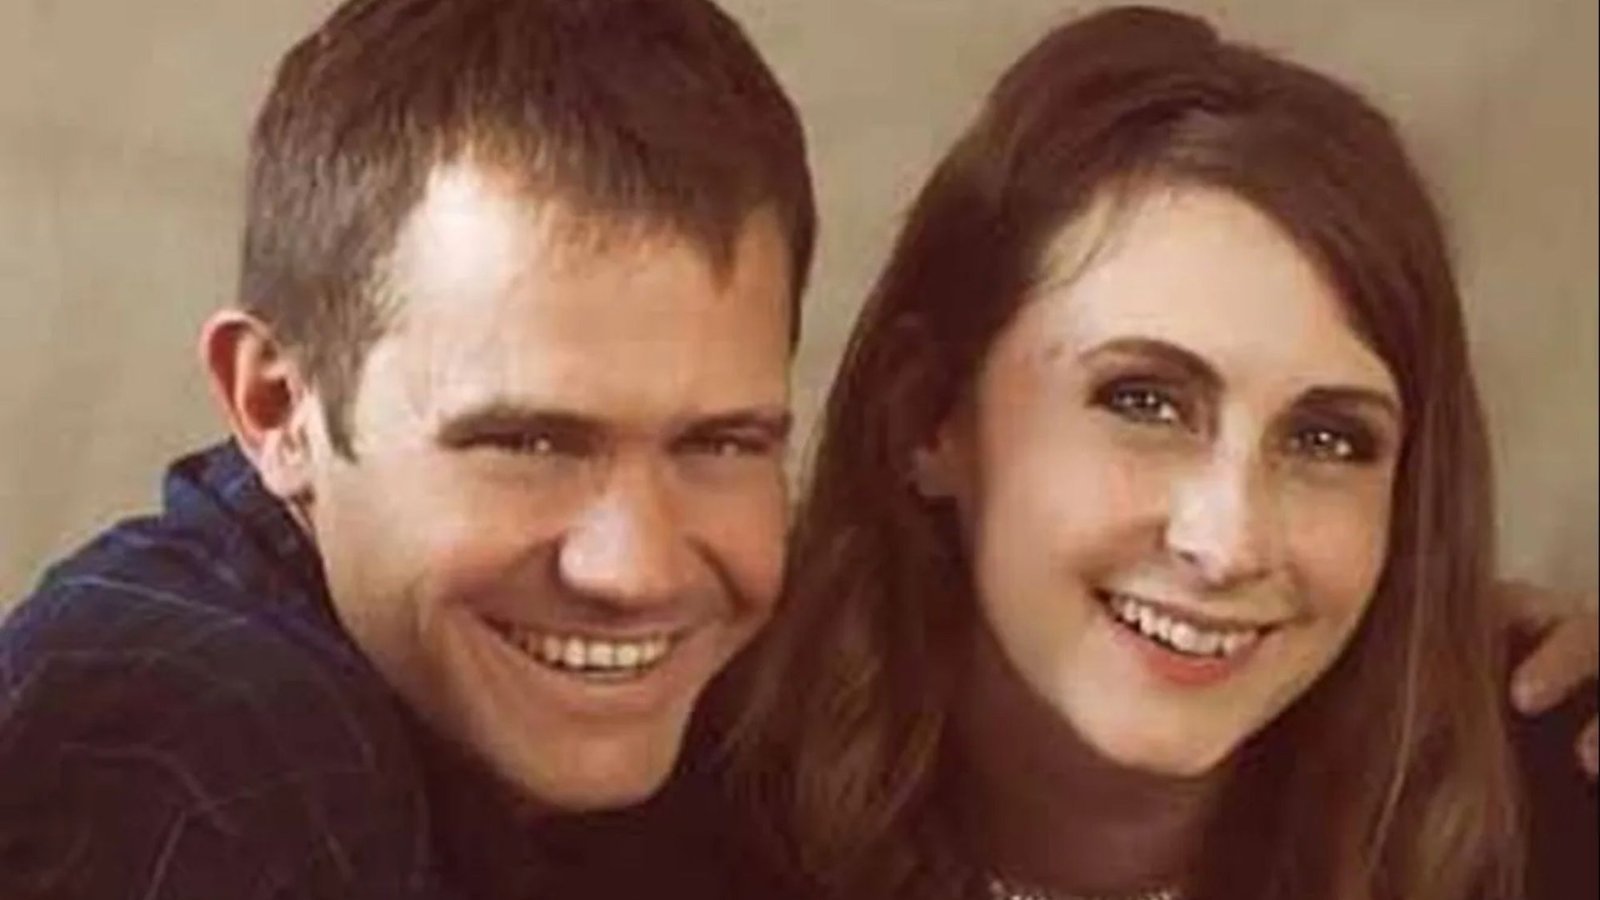 Army officer stabbed repeatedly near barracks pictured with hero wife who saved him after ‘attacker’ appears in court